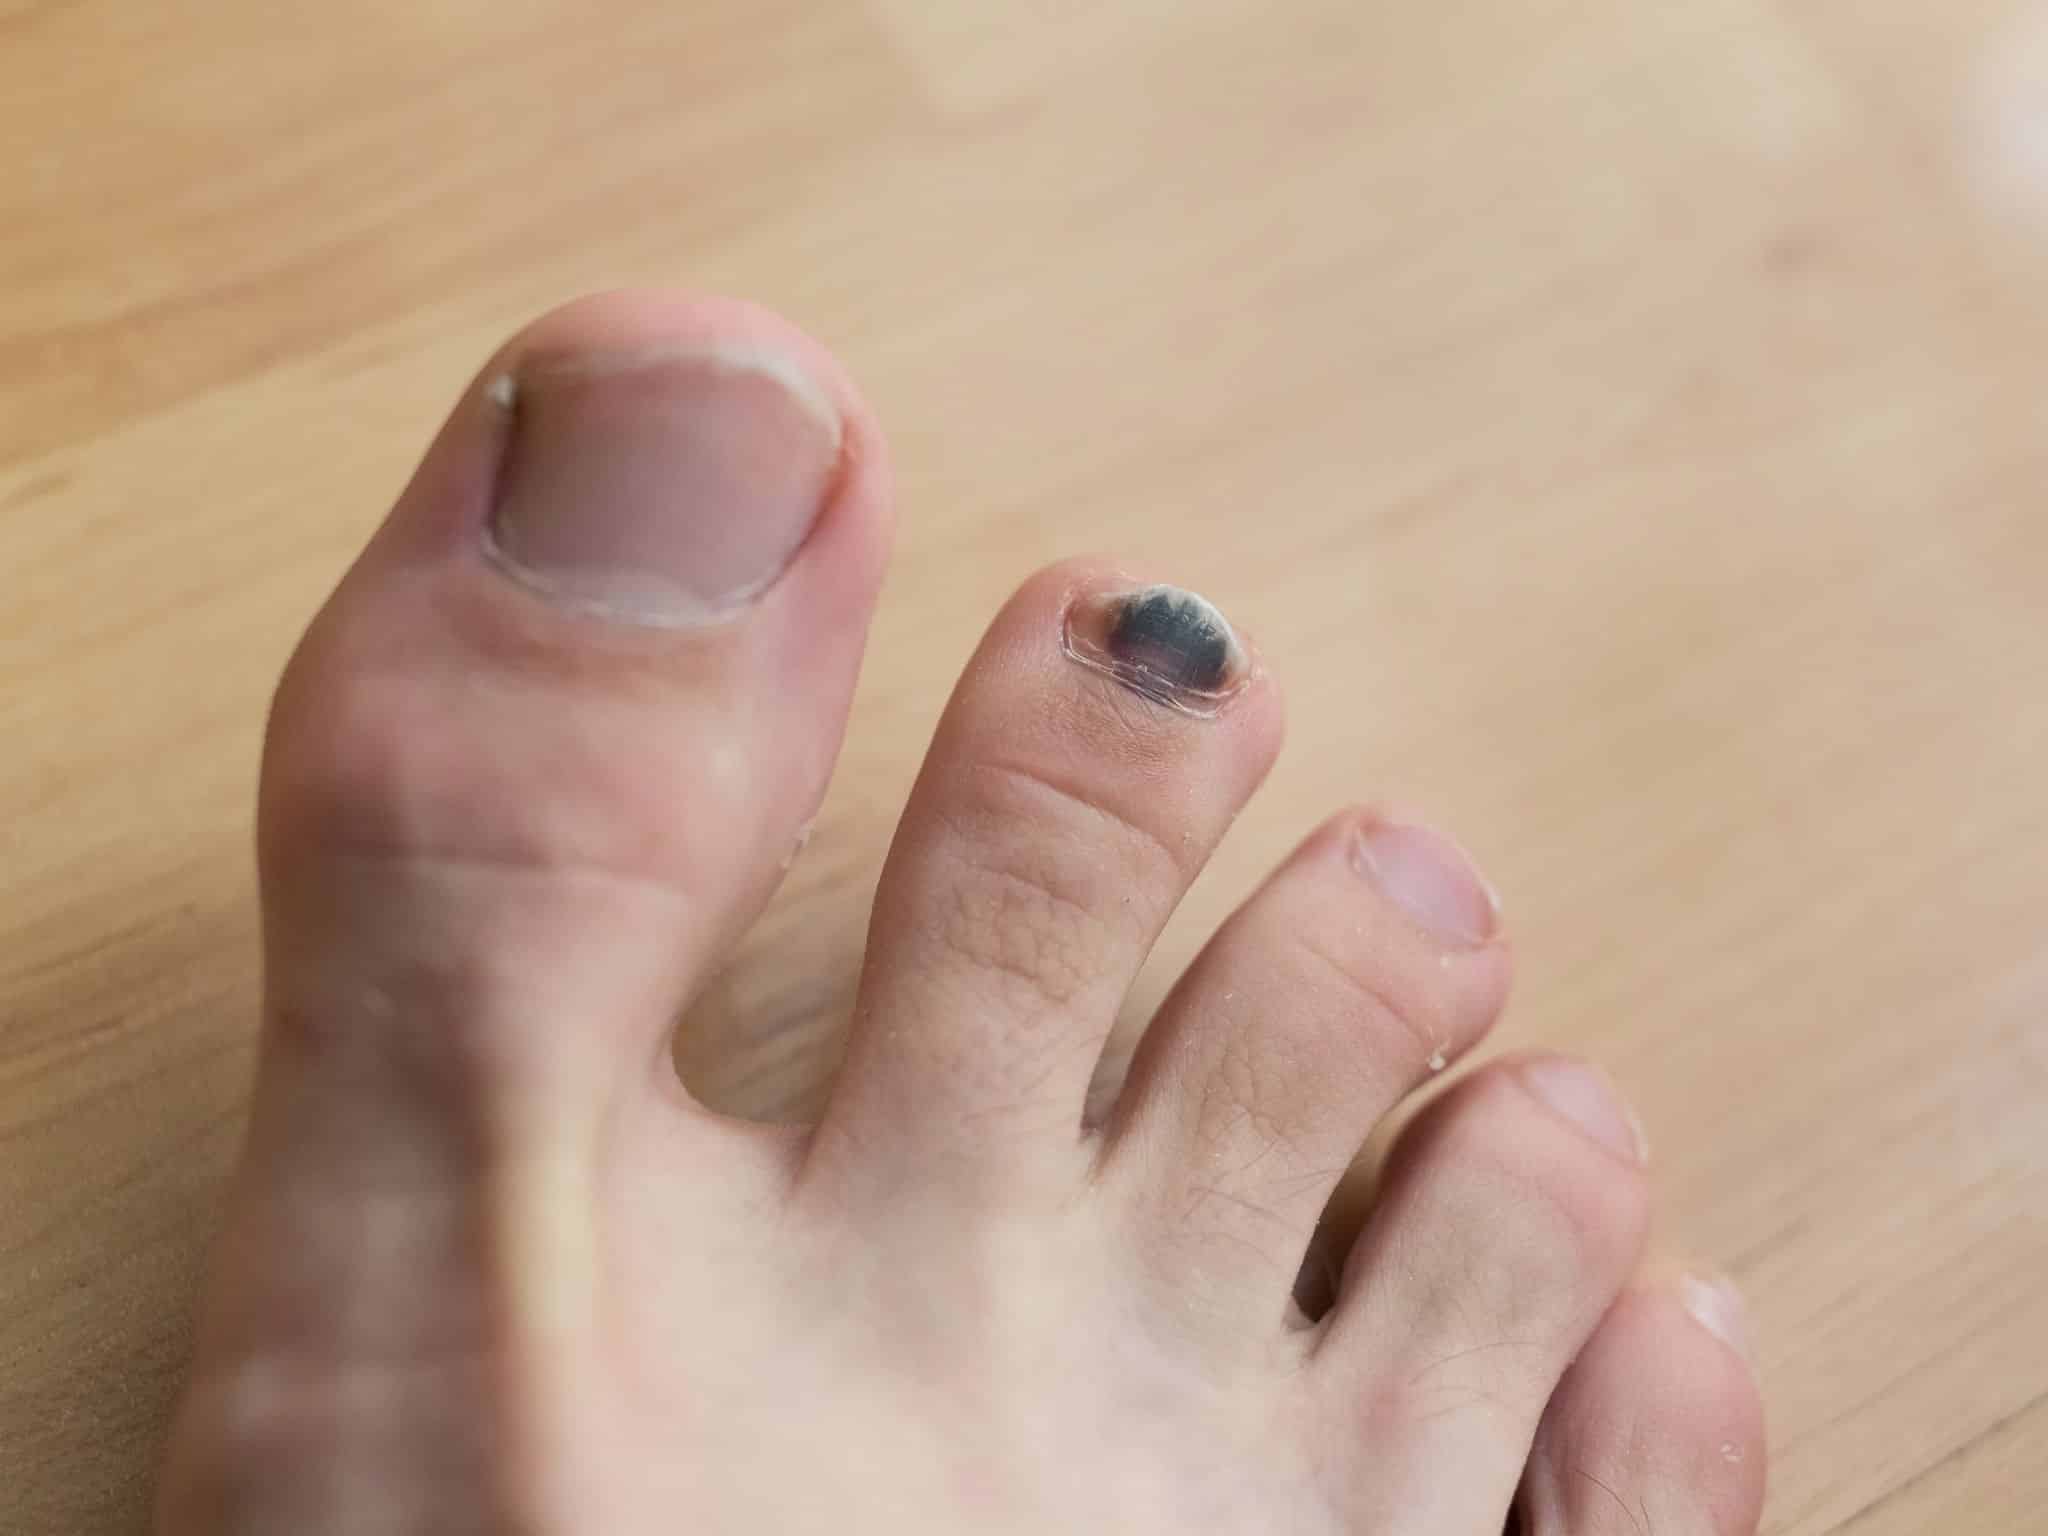 Black toenail after injury - ugly dark blood under nail on the foot of caucasian person. Health problem with toe and finger.